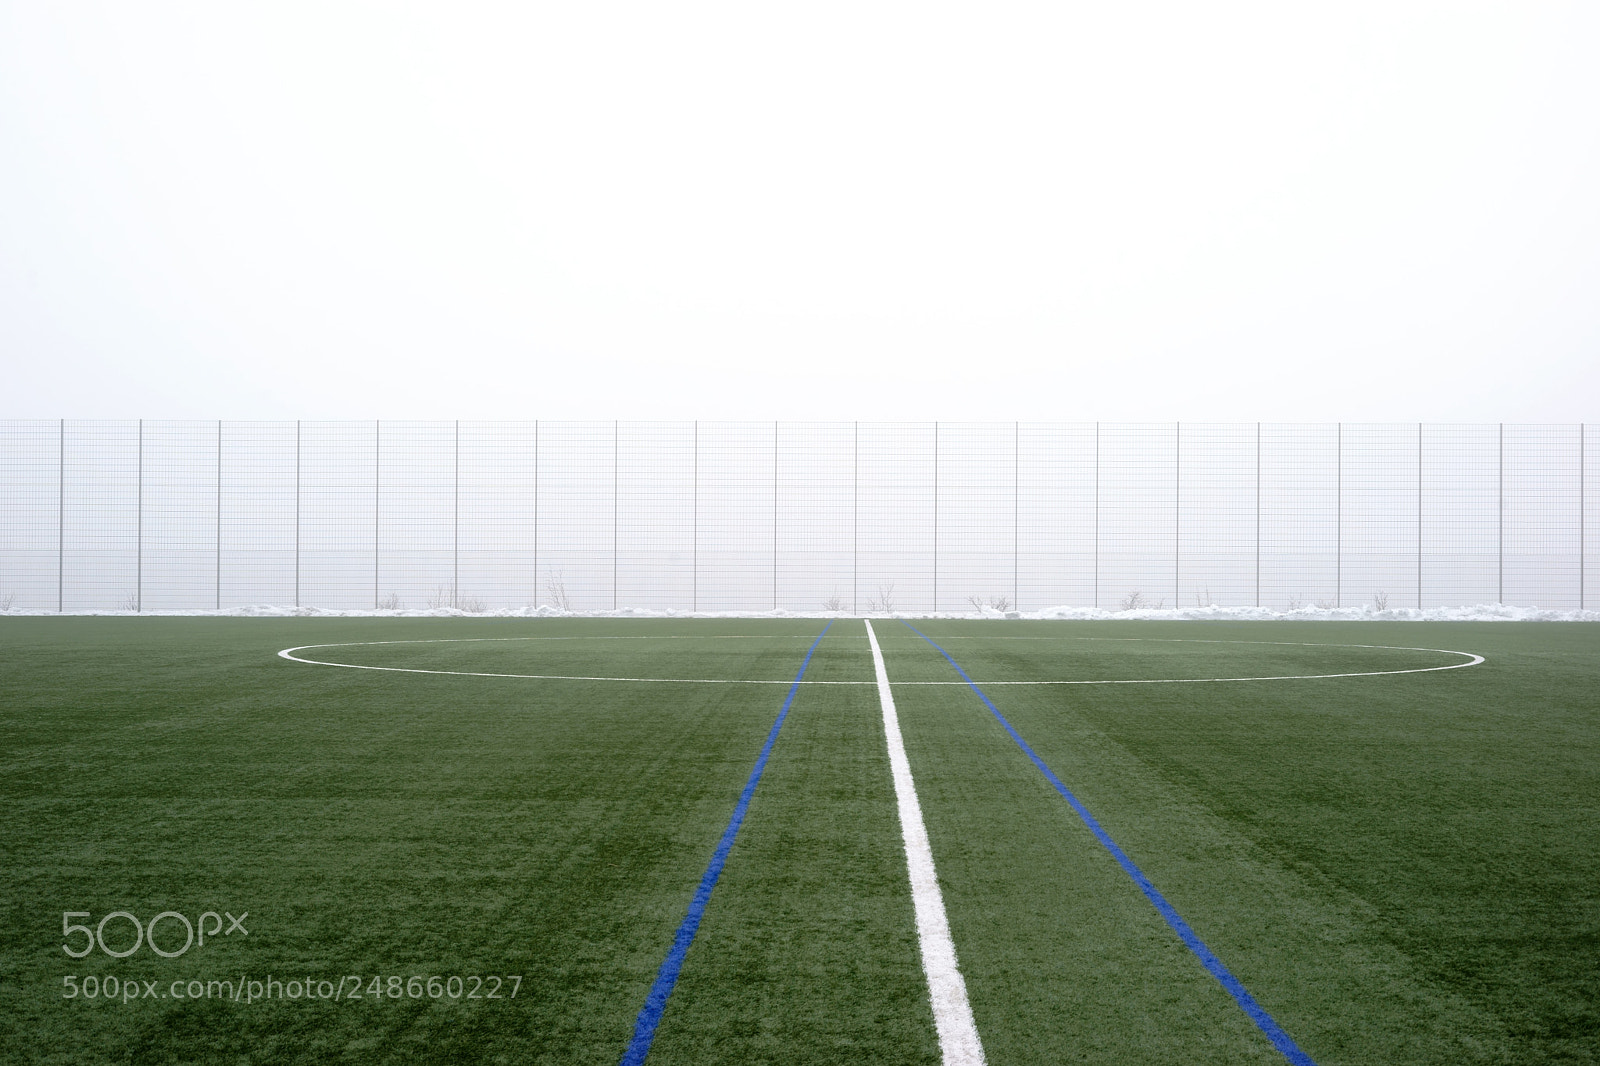 Sony a7 II sample photo. Football field in the photography